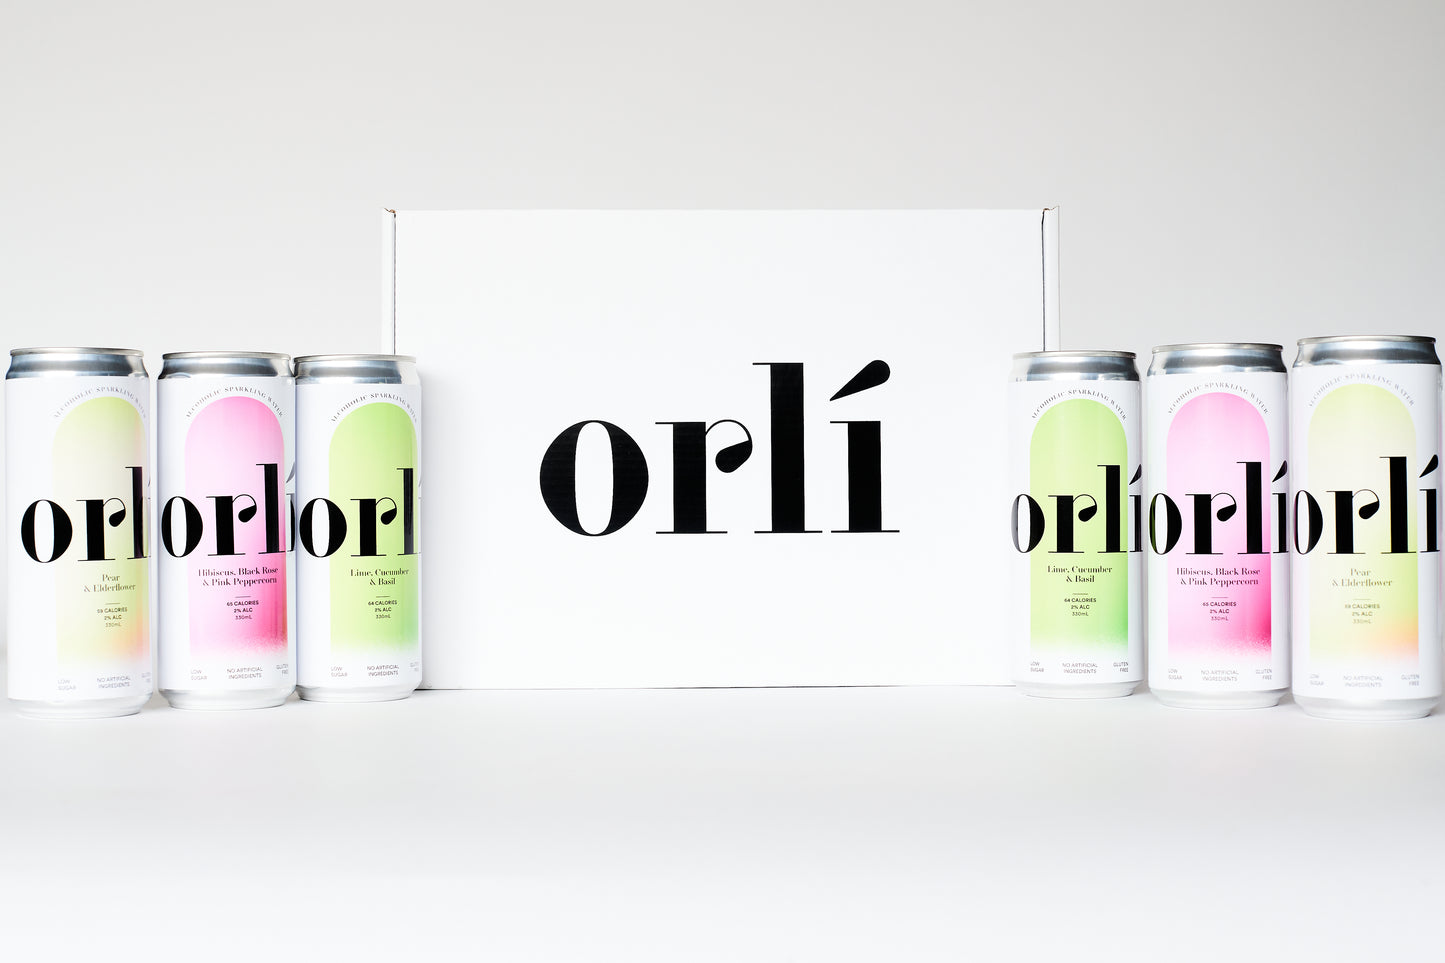 orli box with 2 of each flavour on display, lime cucumber and basil, hibiscus black rose and pink peppercorn and pear and elderflower